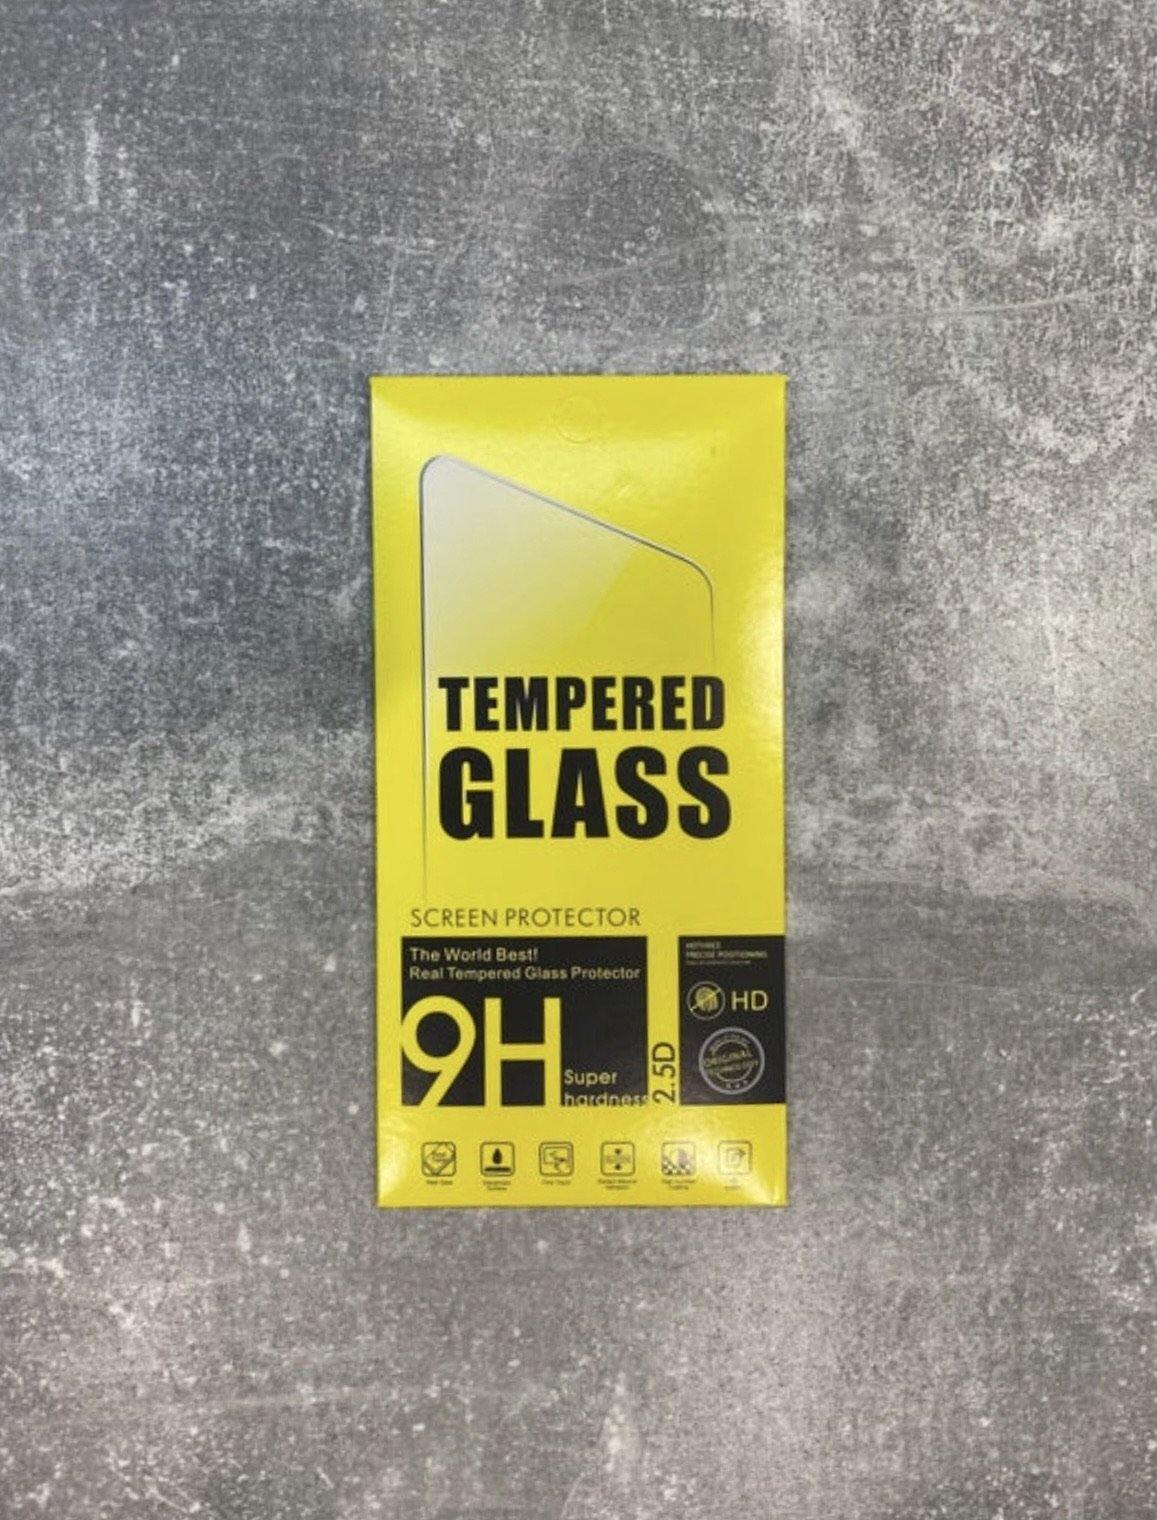 Tempered glass | protective glass | screen protector - PersonalisebyLisa